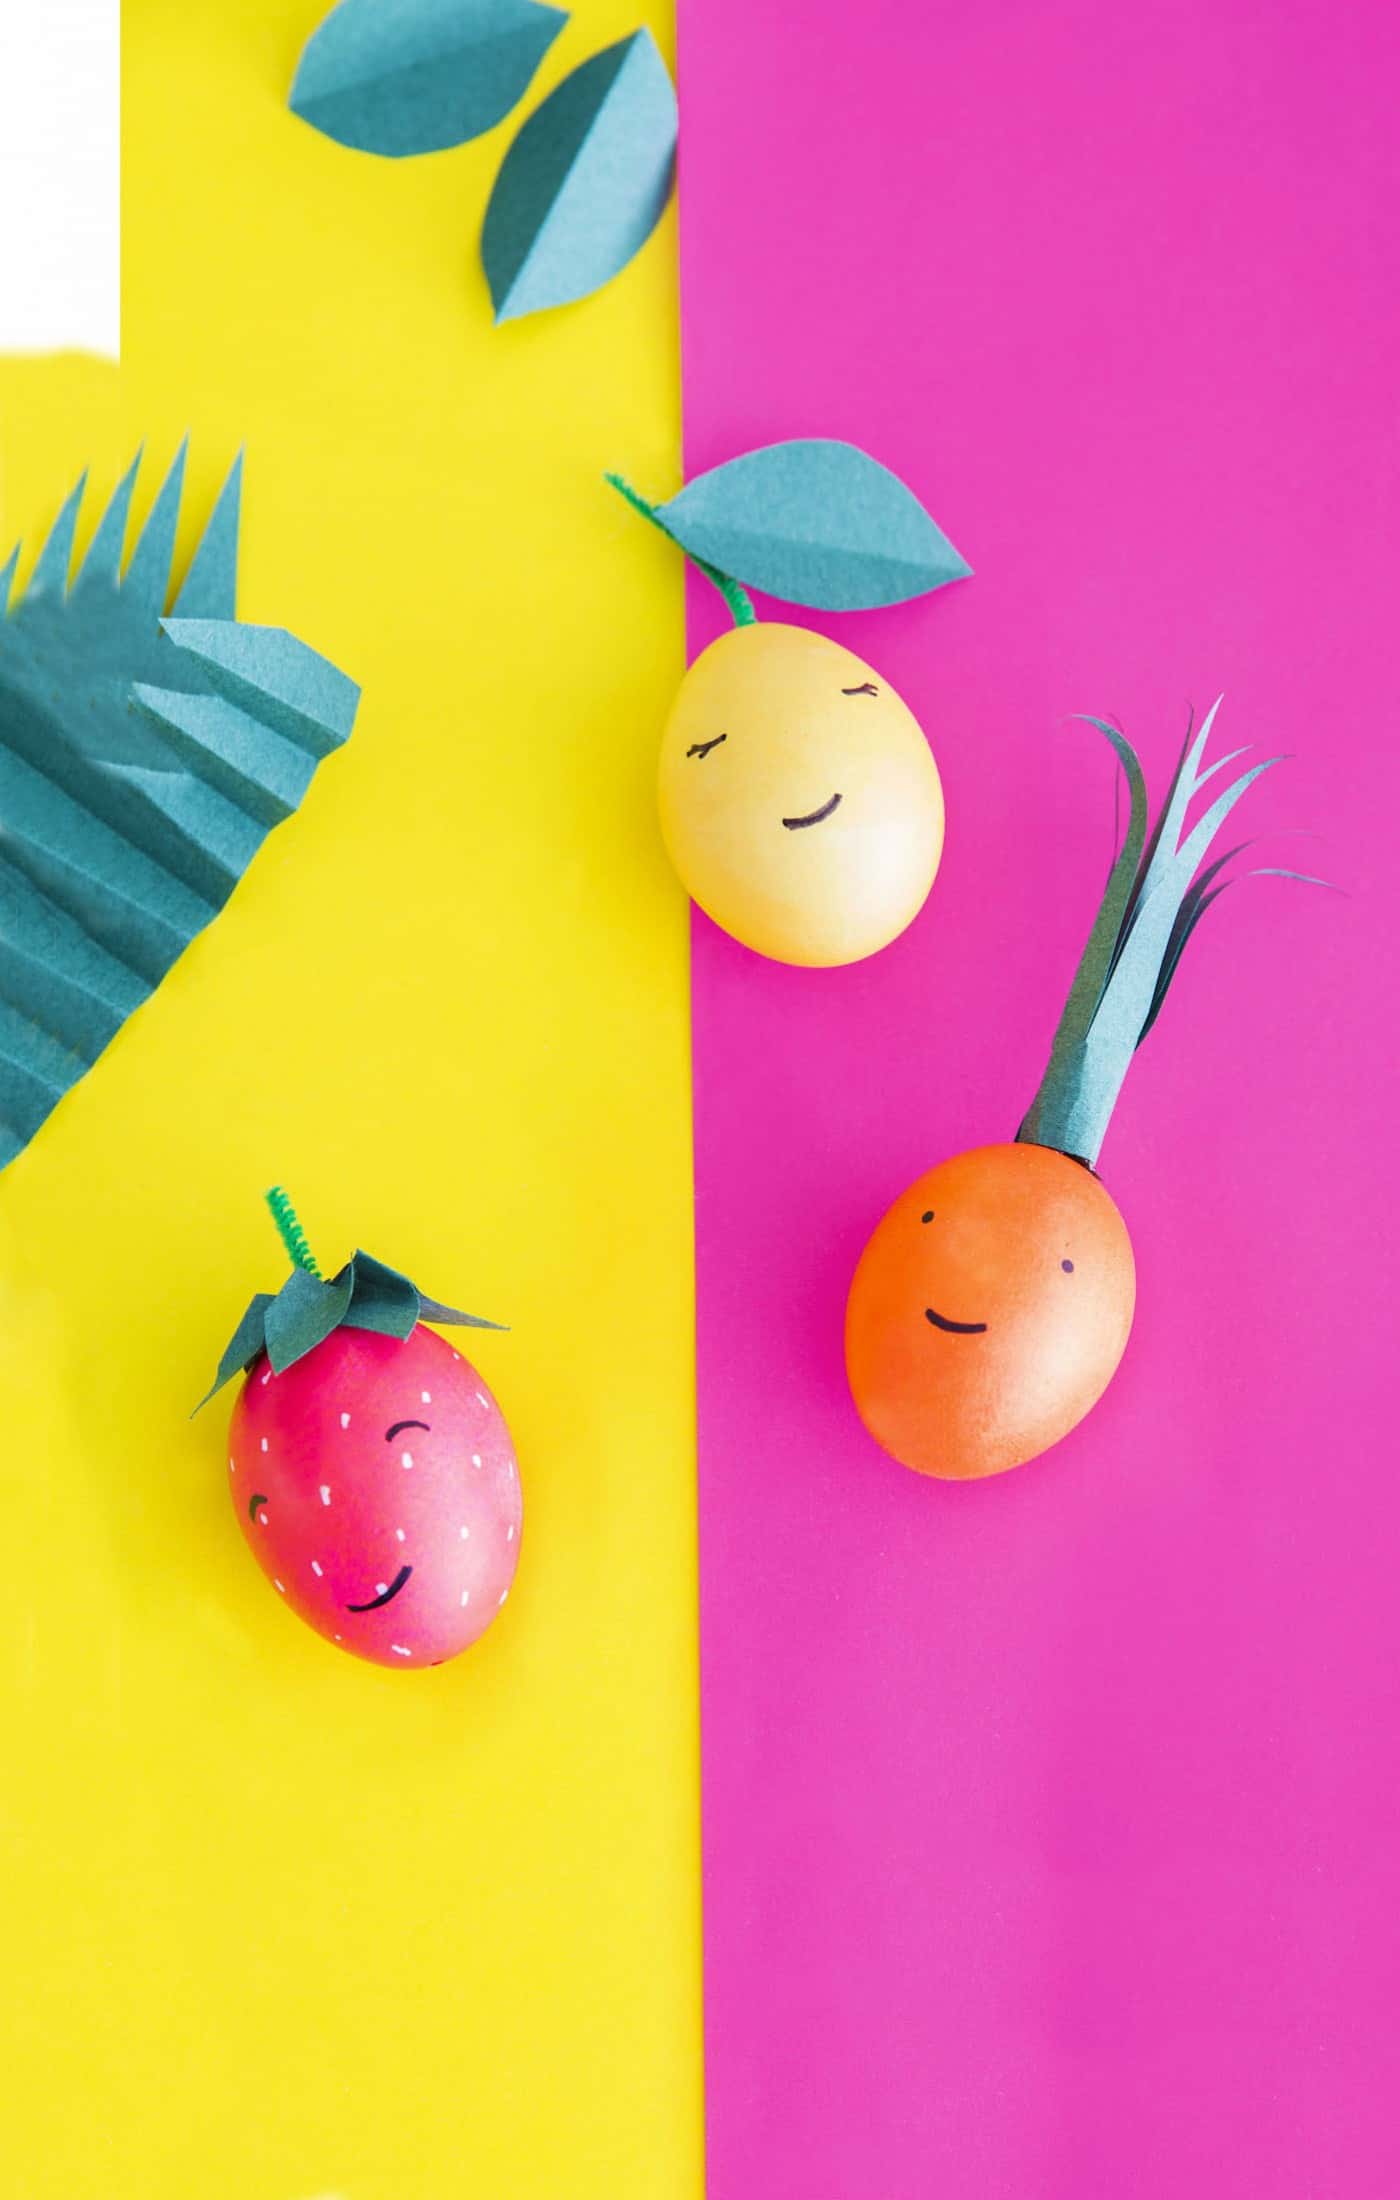 Here are four fun and colorful ways to decorate Easter eggs that kids will love. Use these ideas for a holiday party - you'll love seeing their creations!